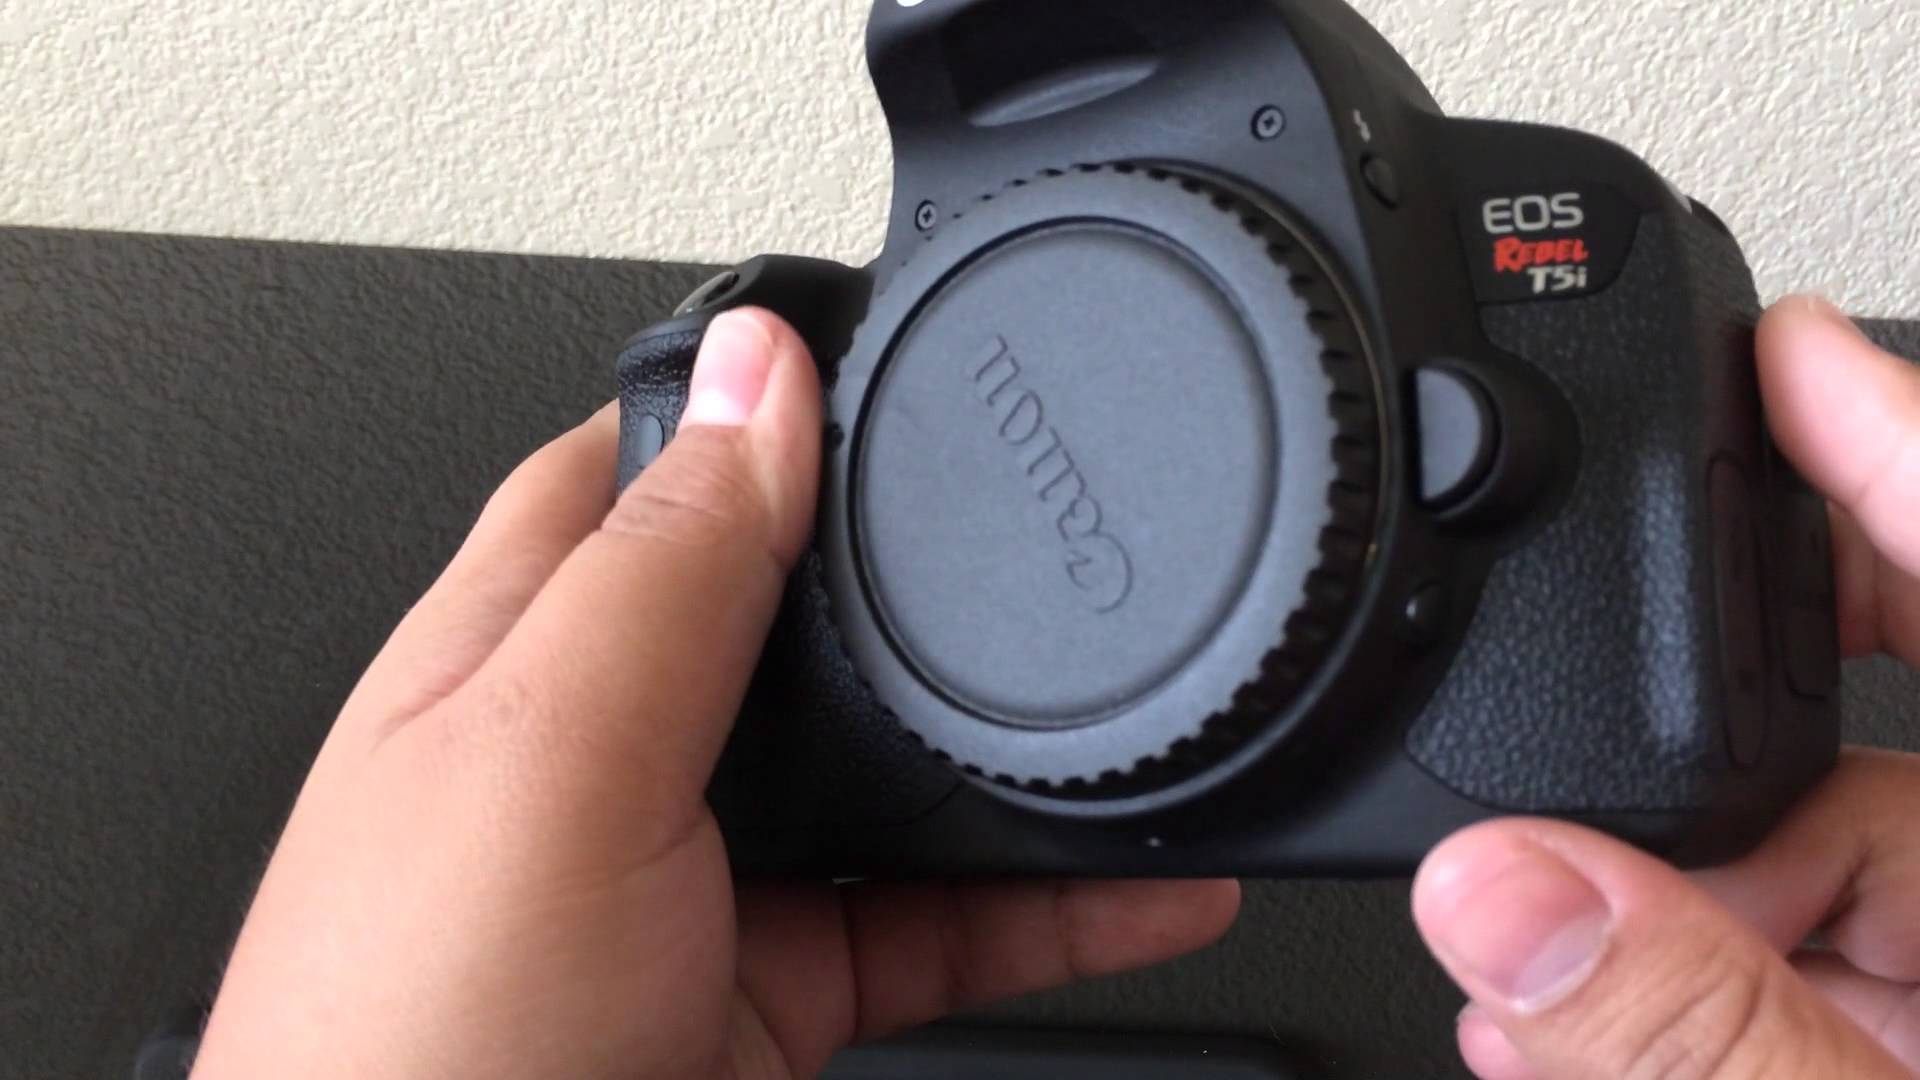 The Unboxing Of The Canon EOS Rebel T5I DSLR With The 18 to 55 mm IS STM Kit Lens